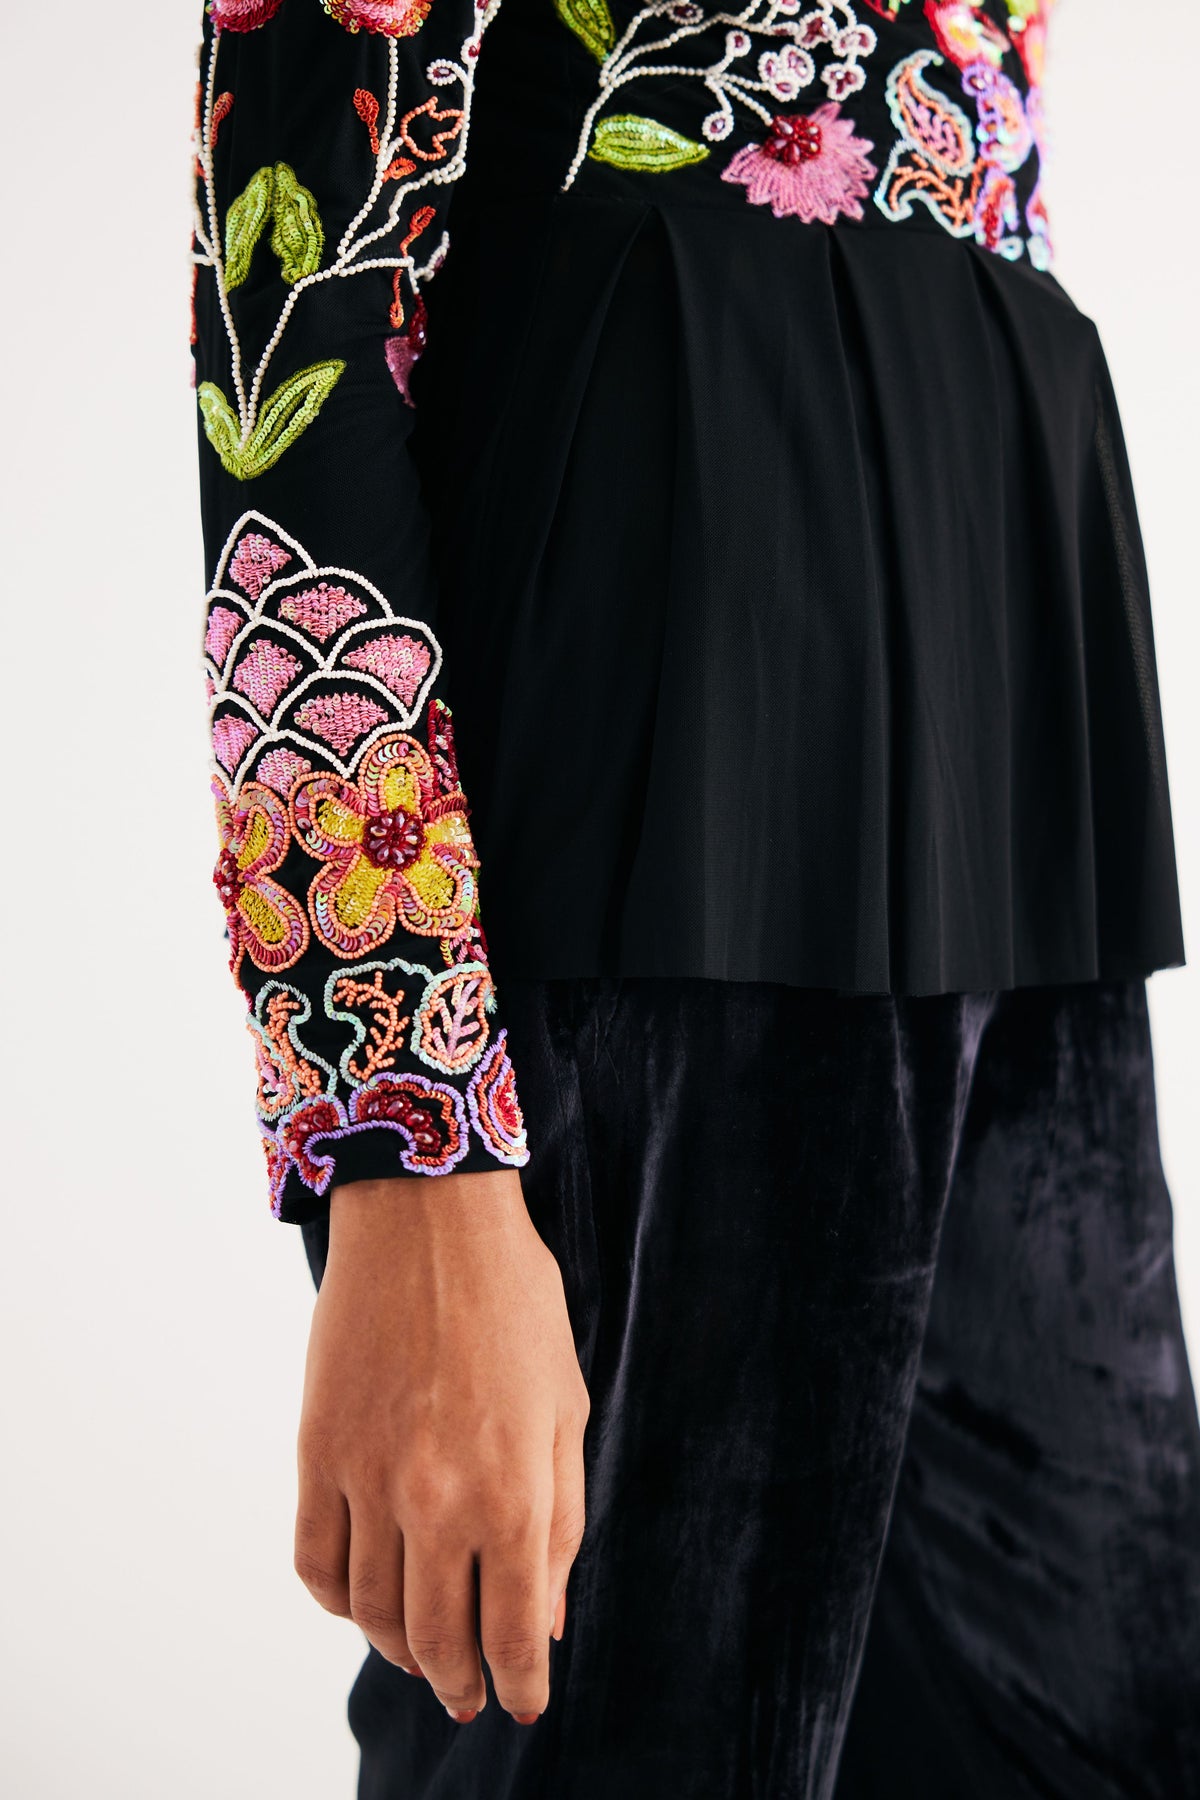 Black Hand Embroidered Floral Net Top